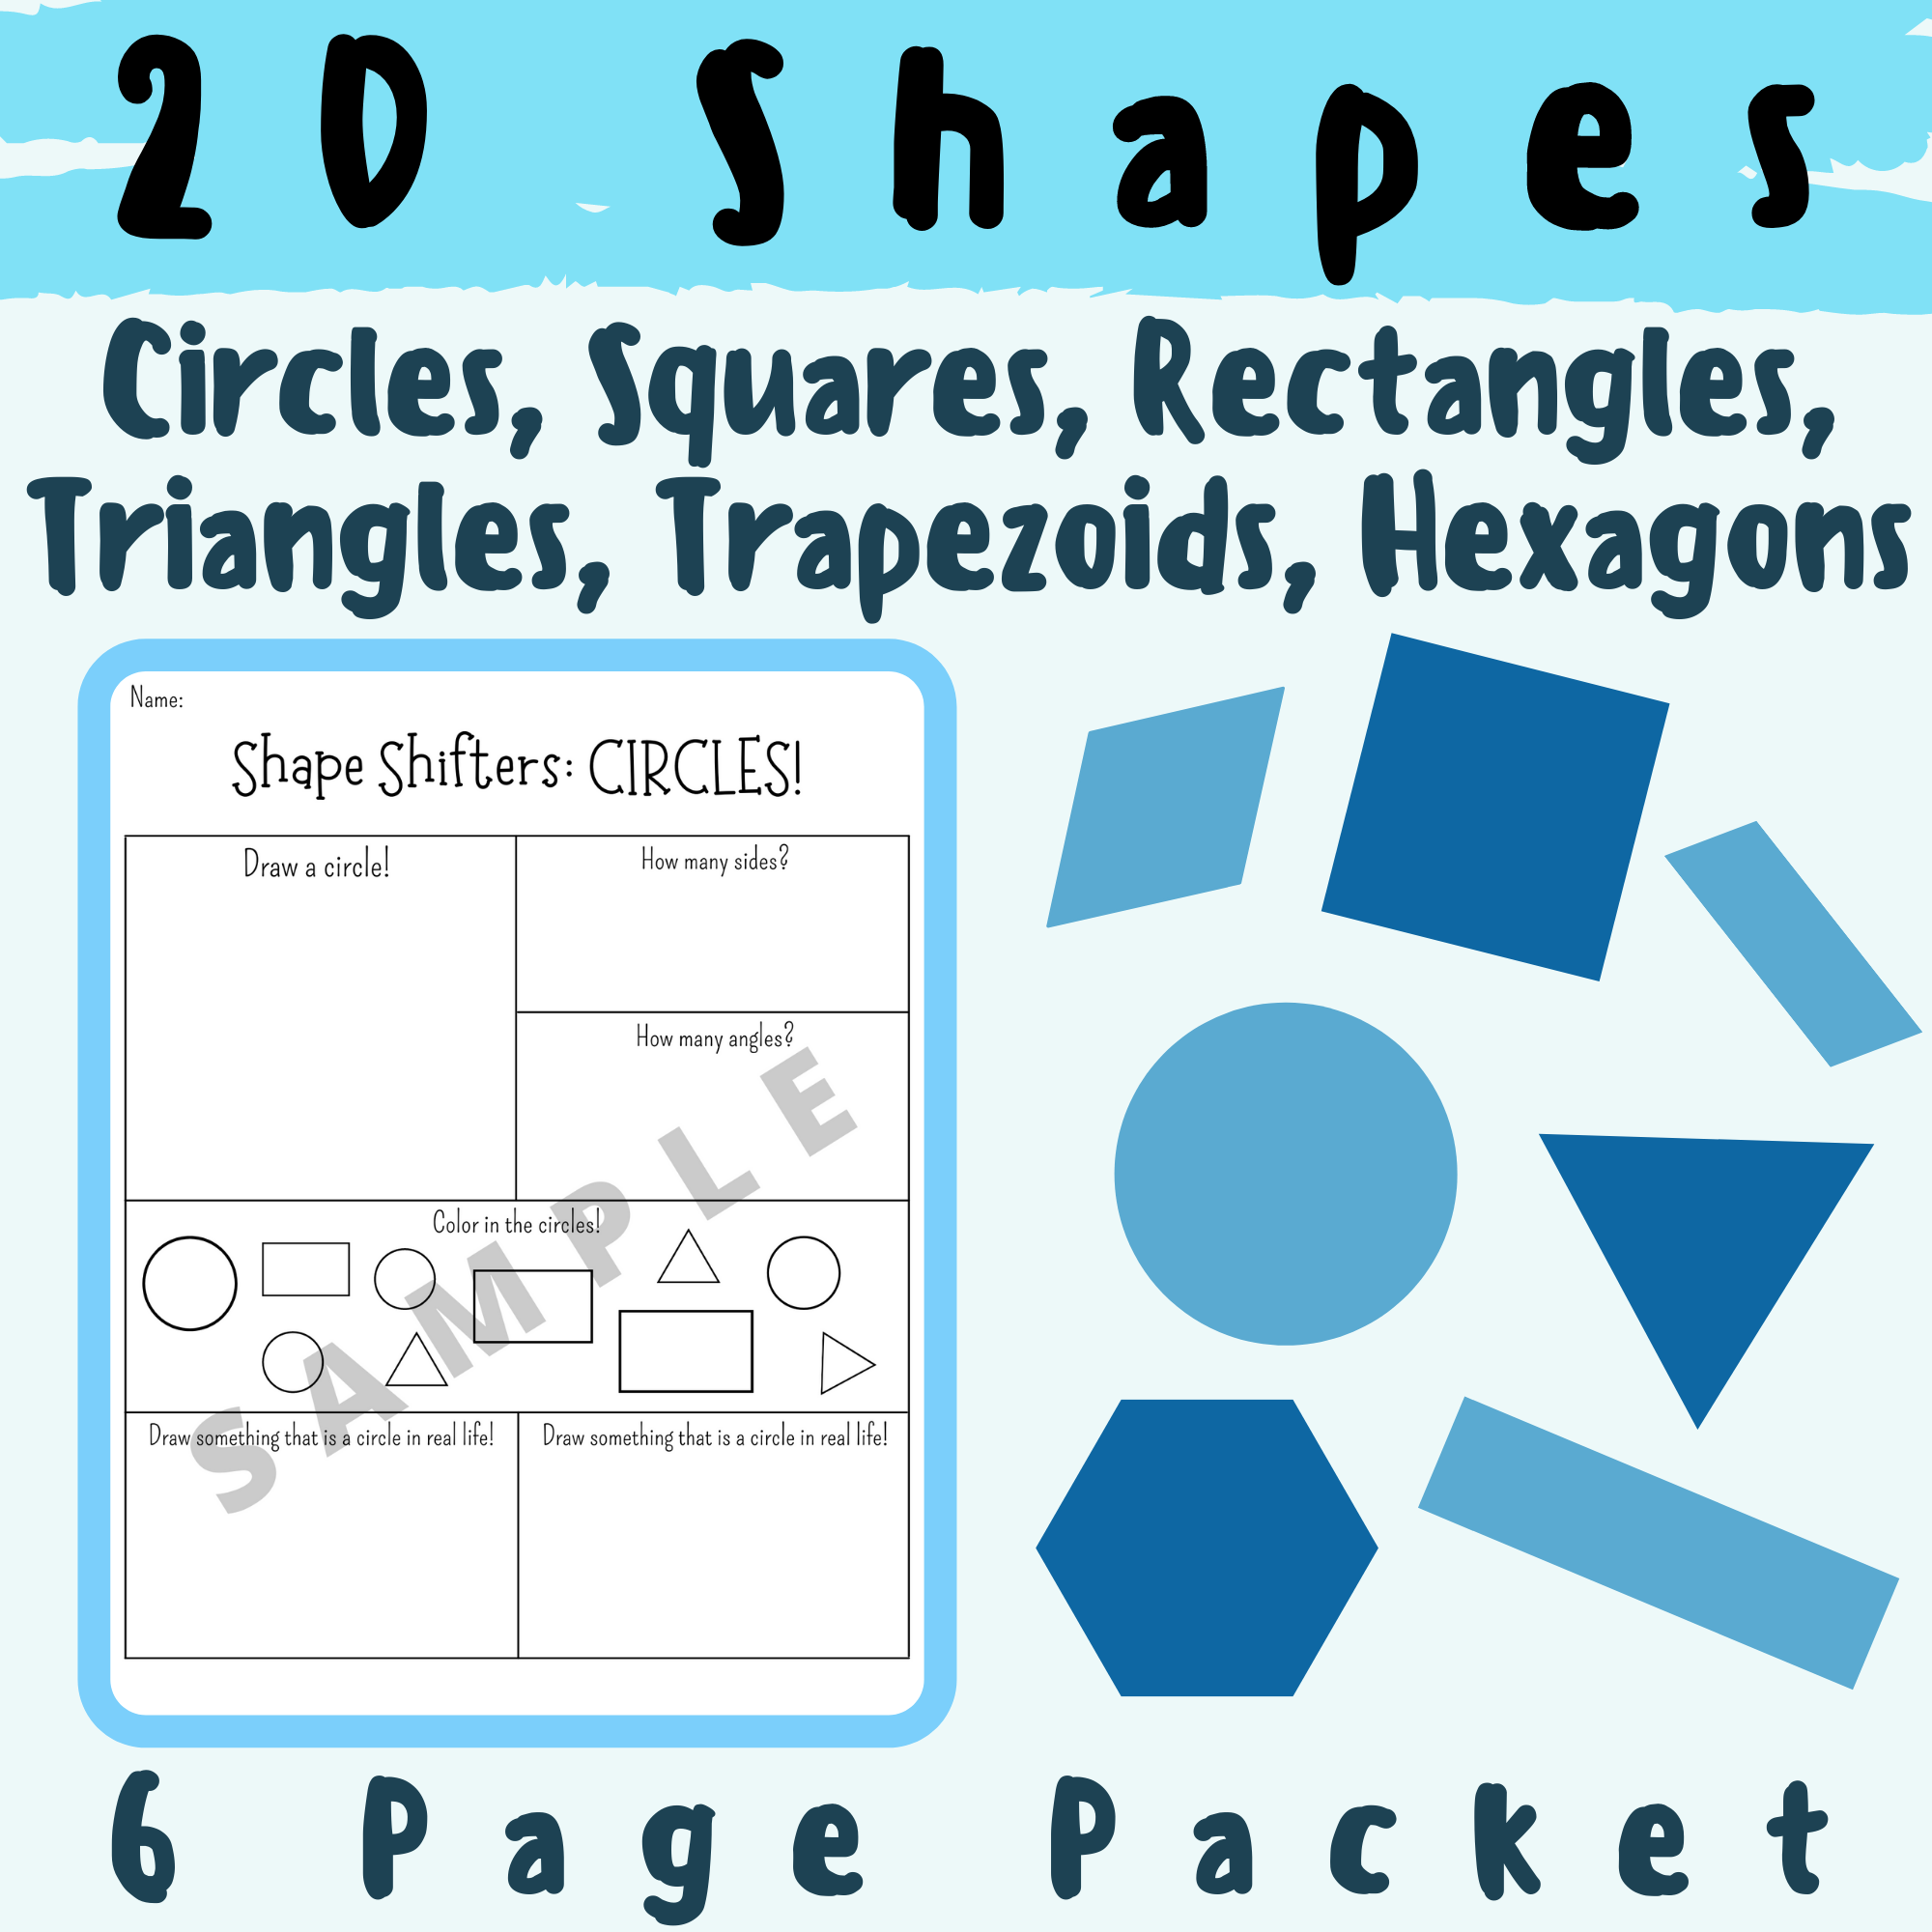 2D Shapes: Circles, Rectangles, Squares, Triangles, Trapezoids, and Hexagons (Drawing, Identifying Sides and Angles) For K-5 Math Elementary School Grade Teachers and Students